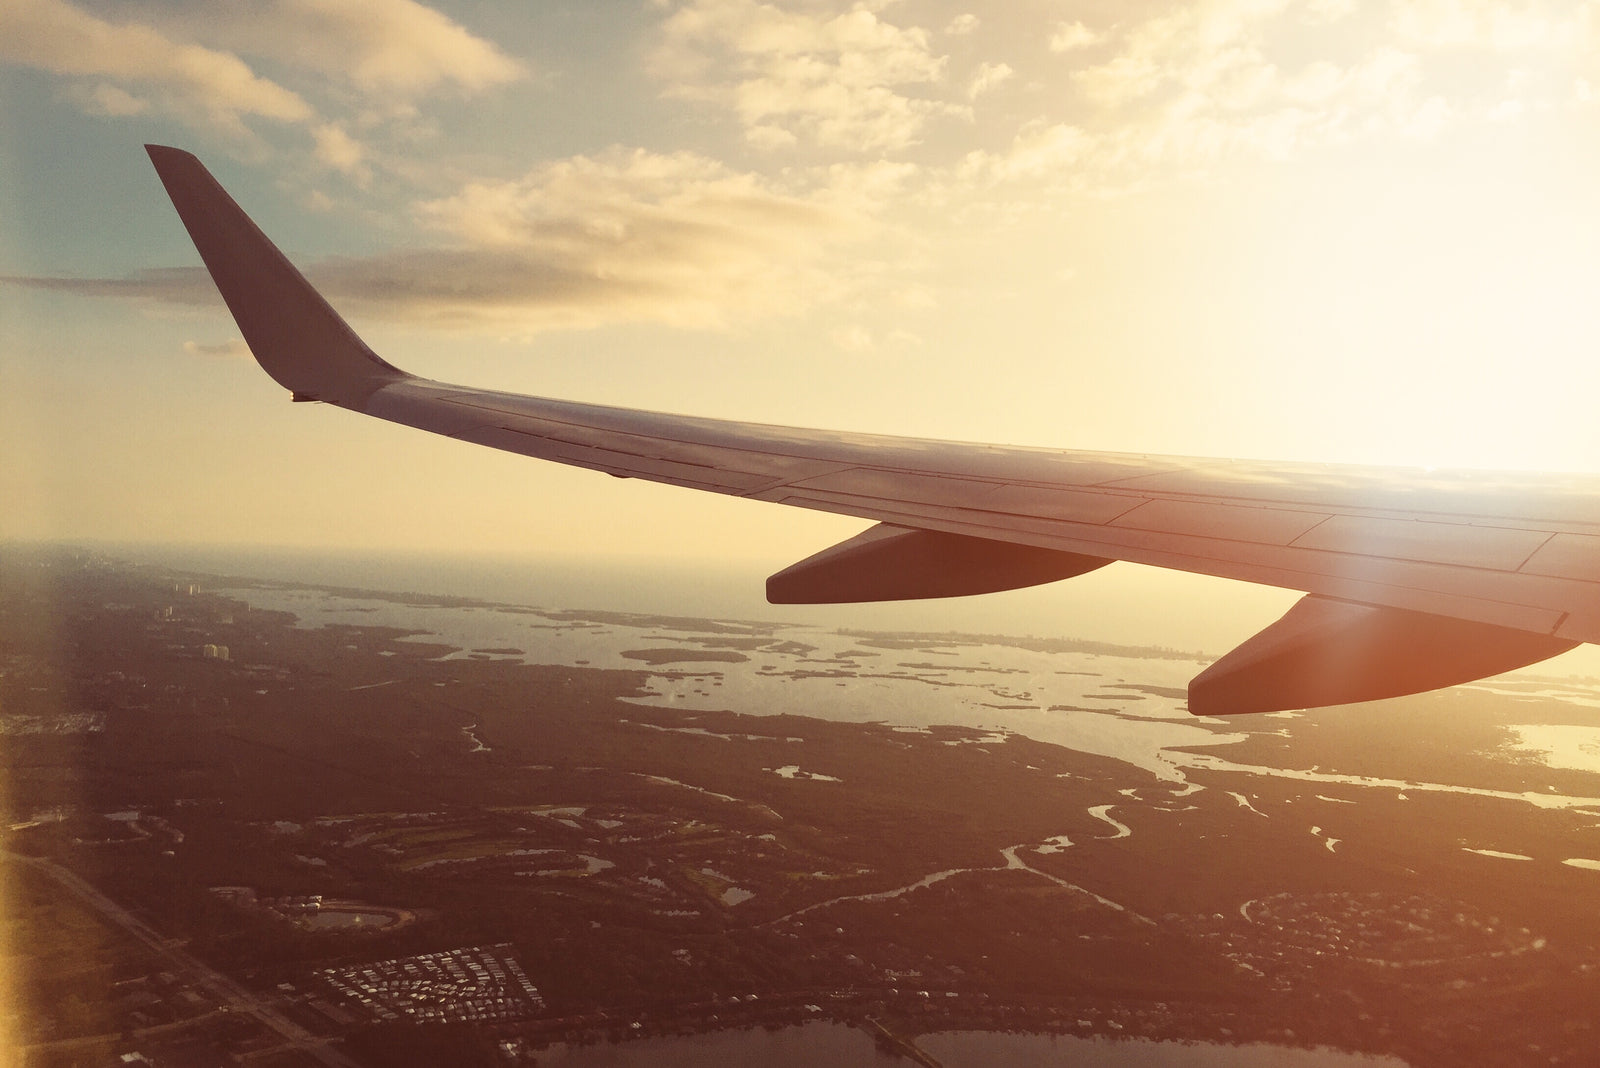 Traveling on Airplanes: How to Have the Best Experience